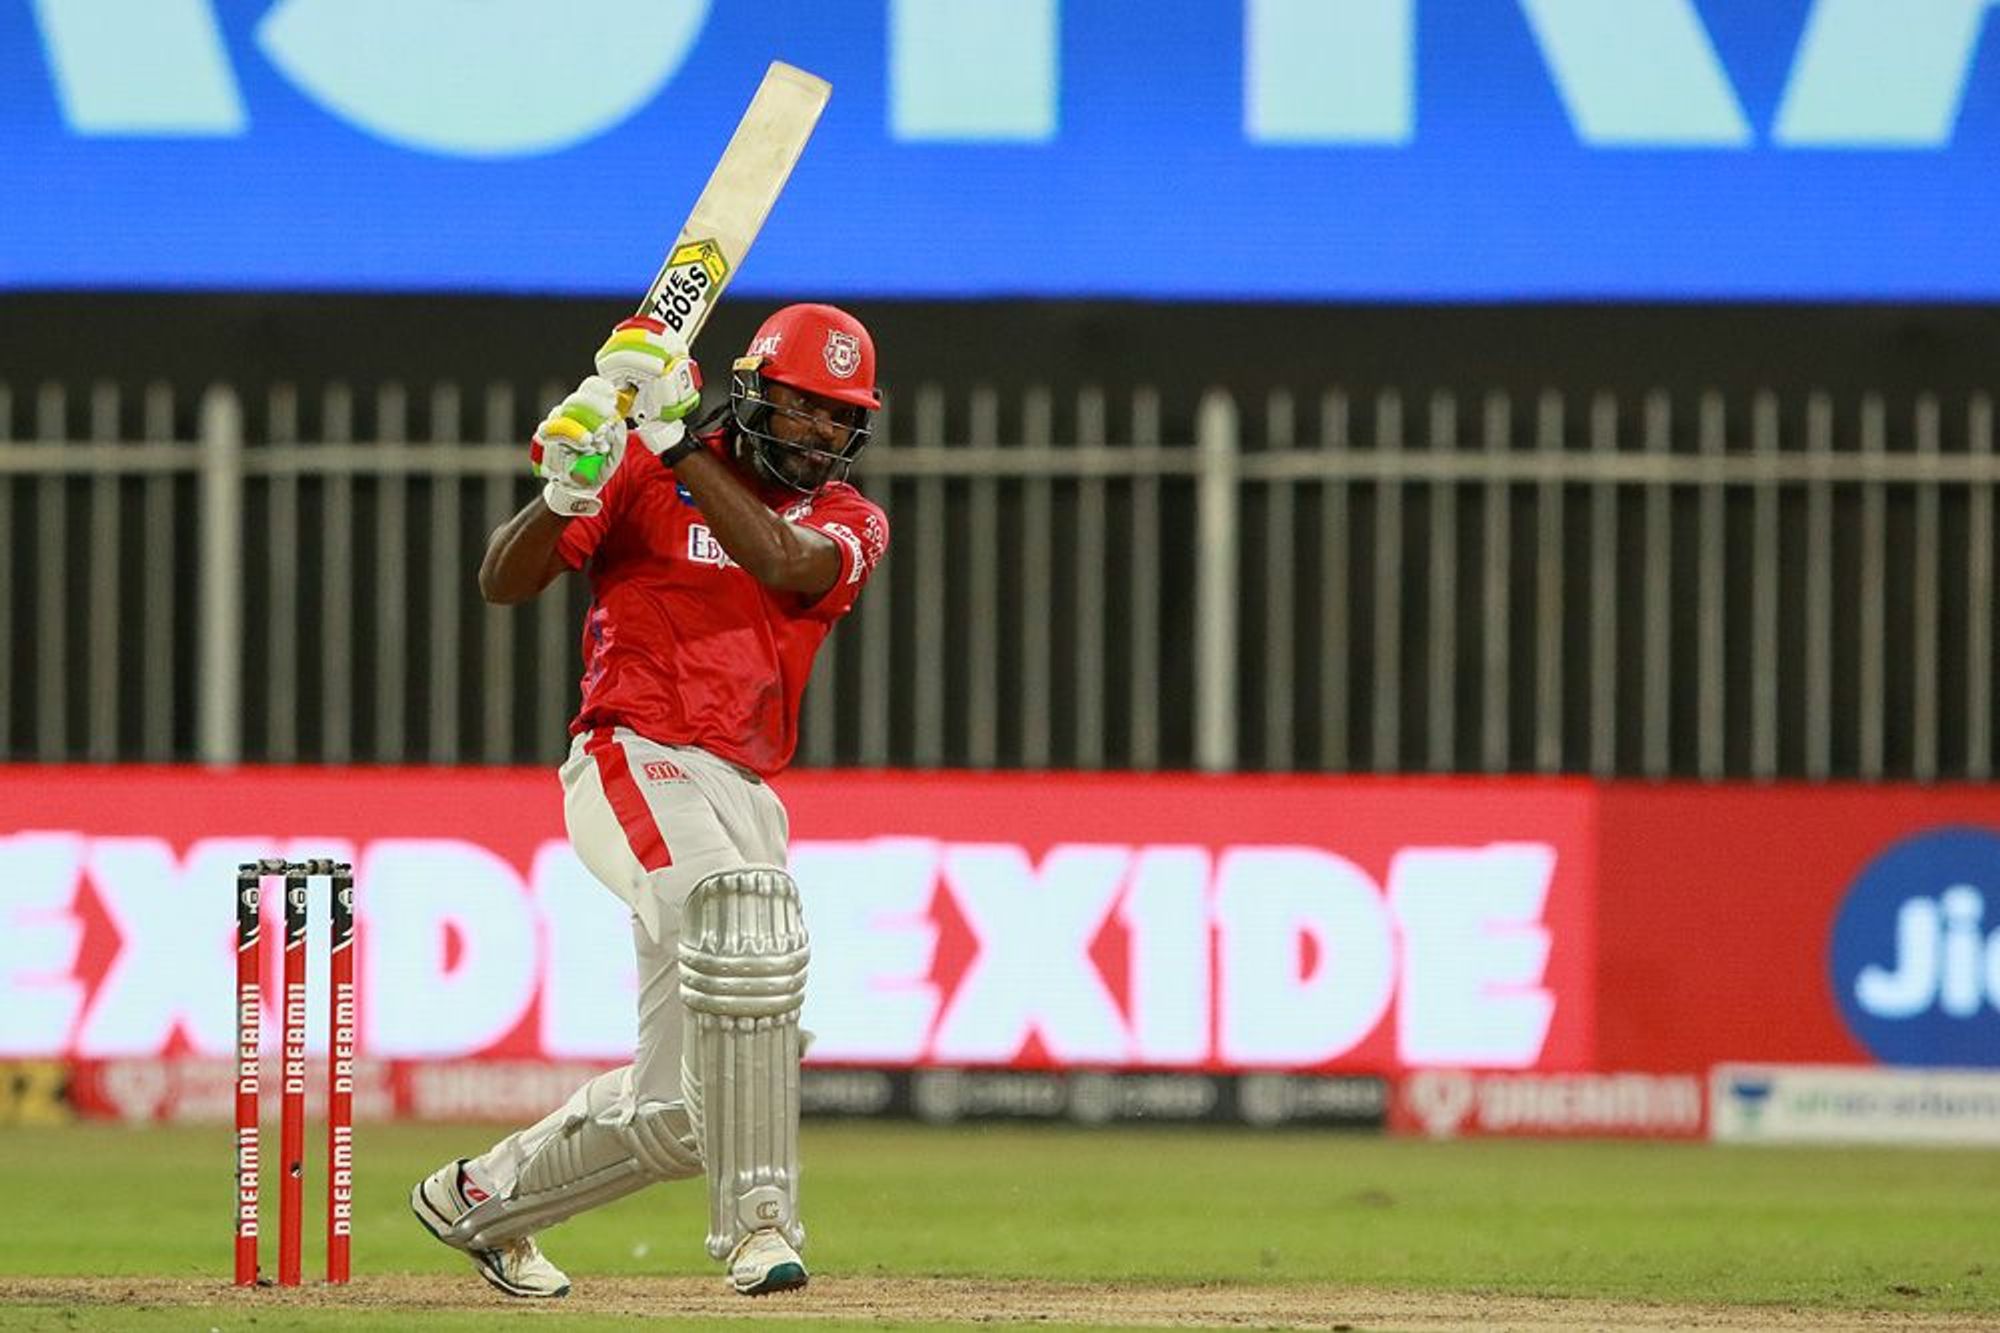 Chris Gayle's inclusion has brought in much needed balance to KXIP batting | BCCI/IPL